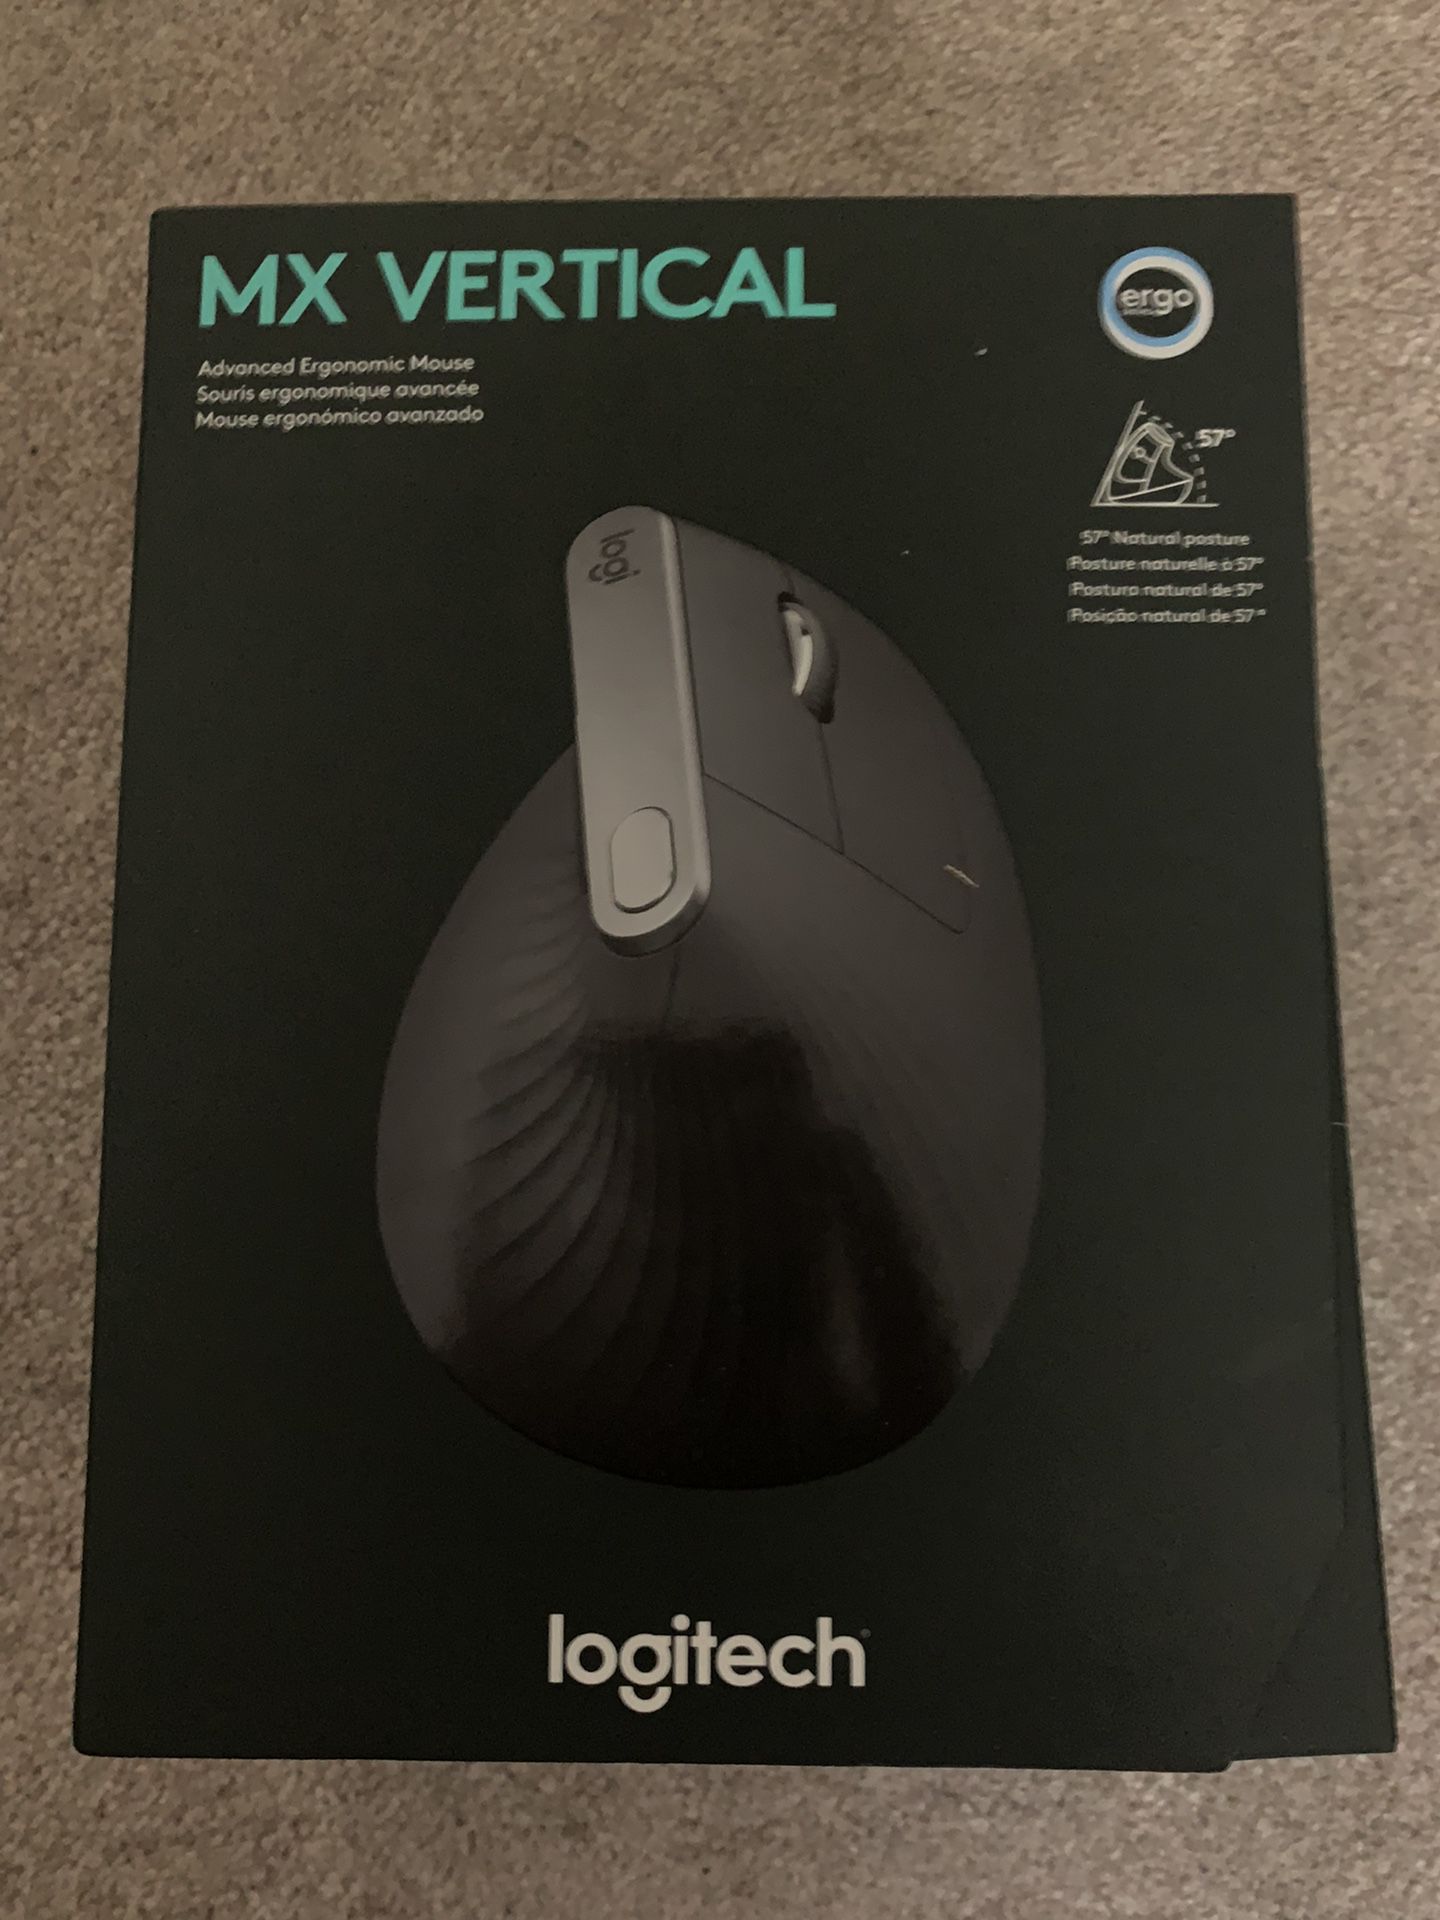 NEW Logitech MX Vertical Mouse SELL OR TRADE